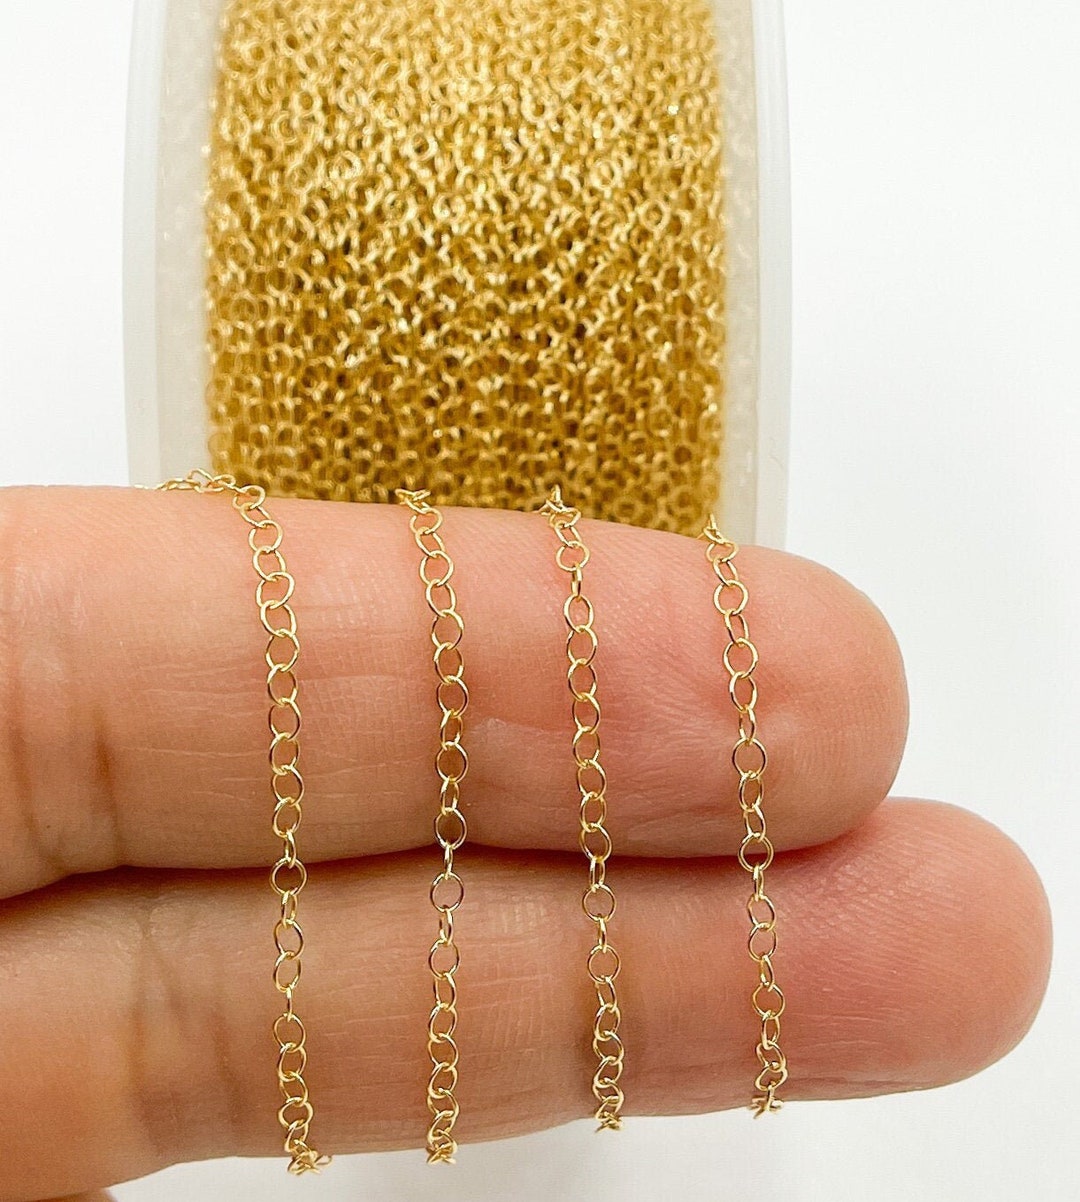 1/20 14K Gold Filled Chain-1.5X2 Cable Flat Oval Chain - Unfinished Bulk  Chain (sold per foot)